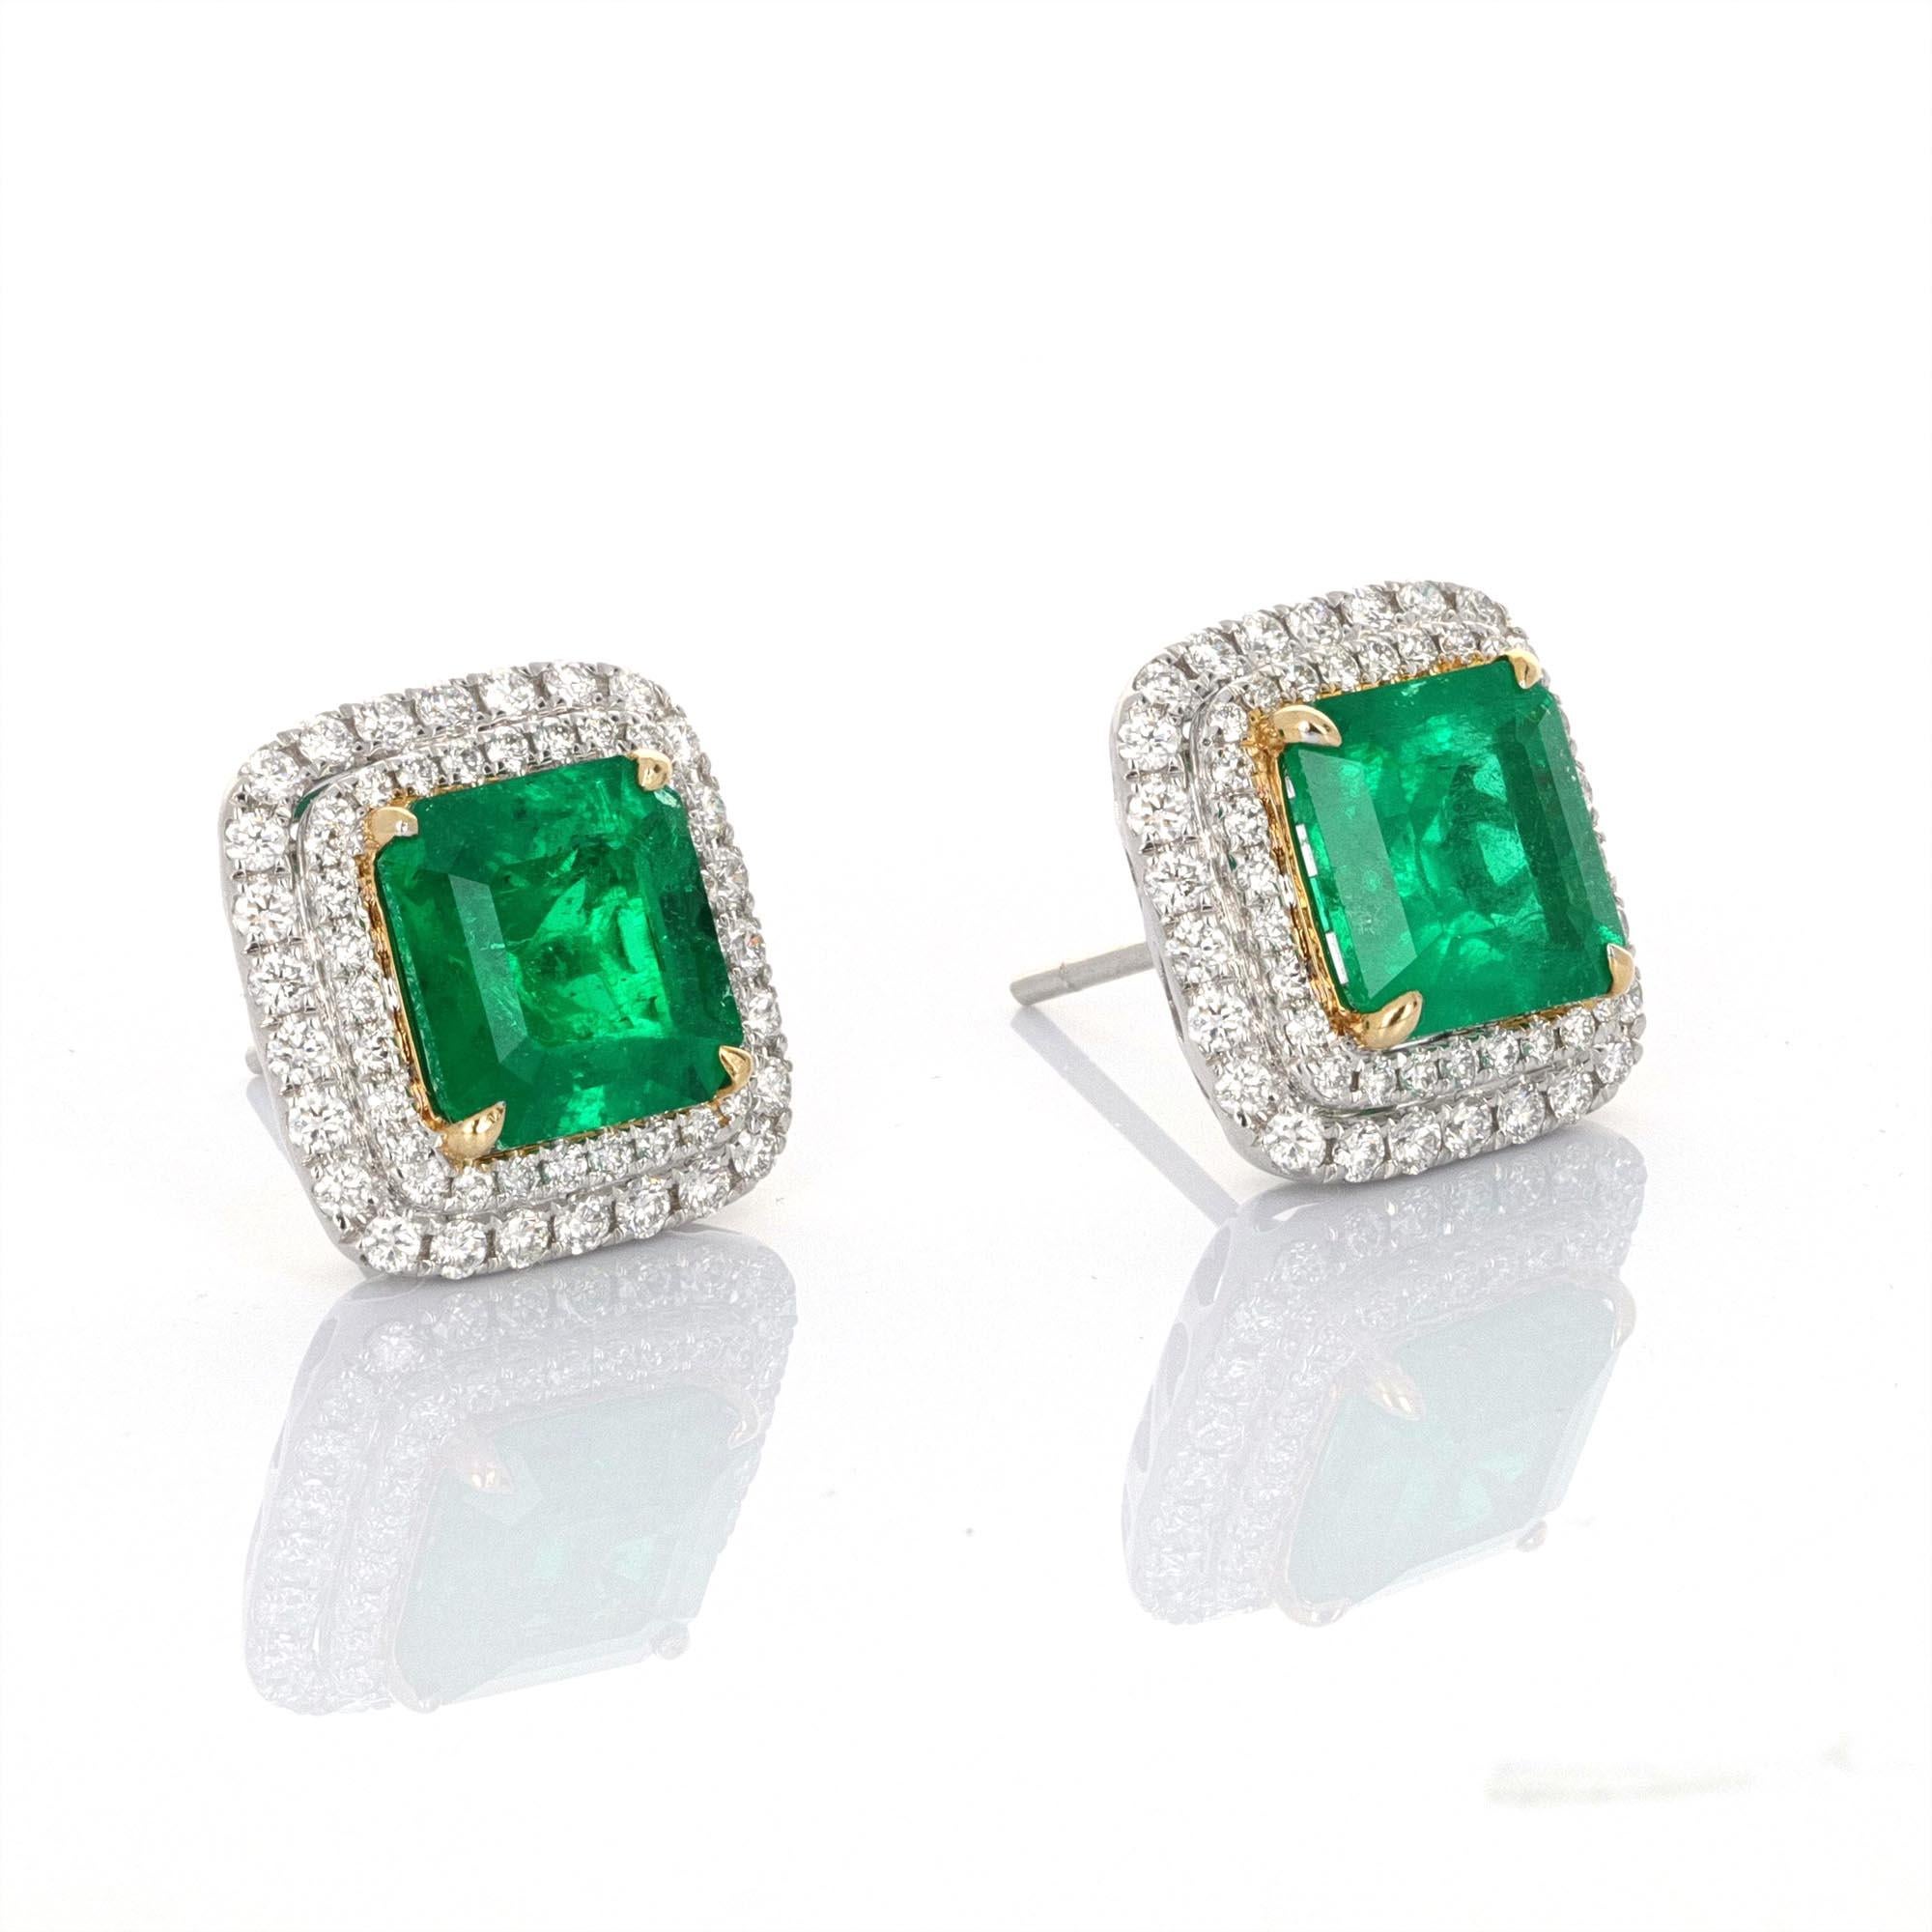 5 carat total weight certified columbian minor emerald and diamond stud earrings. The center emeralds are certified by CDC. The emeralds are columbian, weigh 2.45 carats and 2.56 carats and have minor indications of heating. The color of these